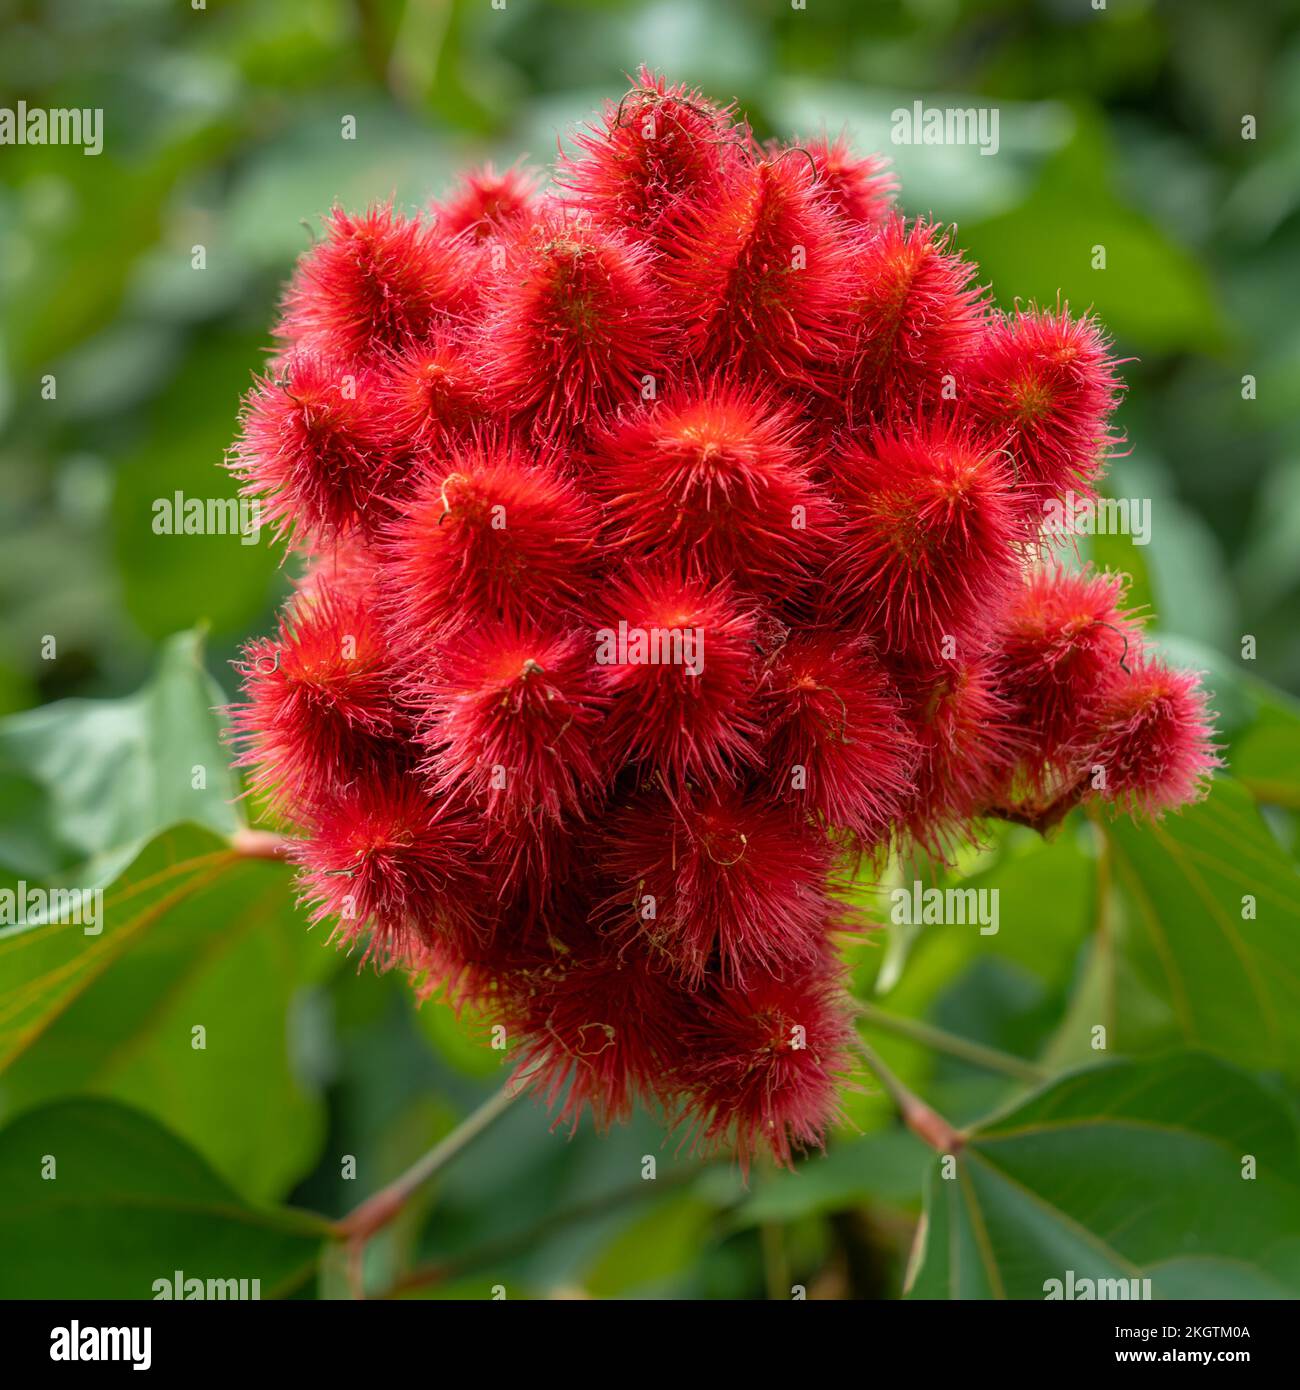 Closeup view of bright red fruits or seedpods of bixa orellana aka achiote or lipstick tree isolated outdoors on green natural background Stock Photo